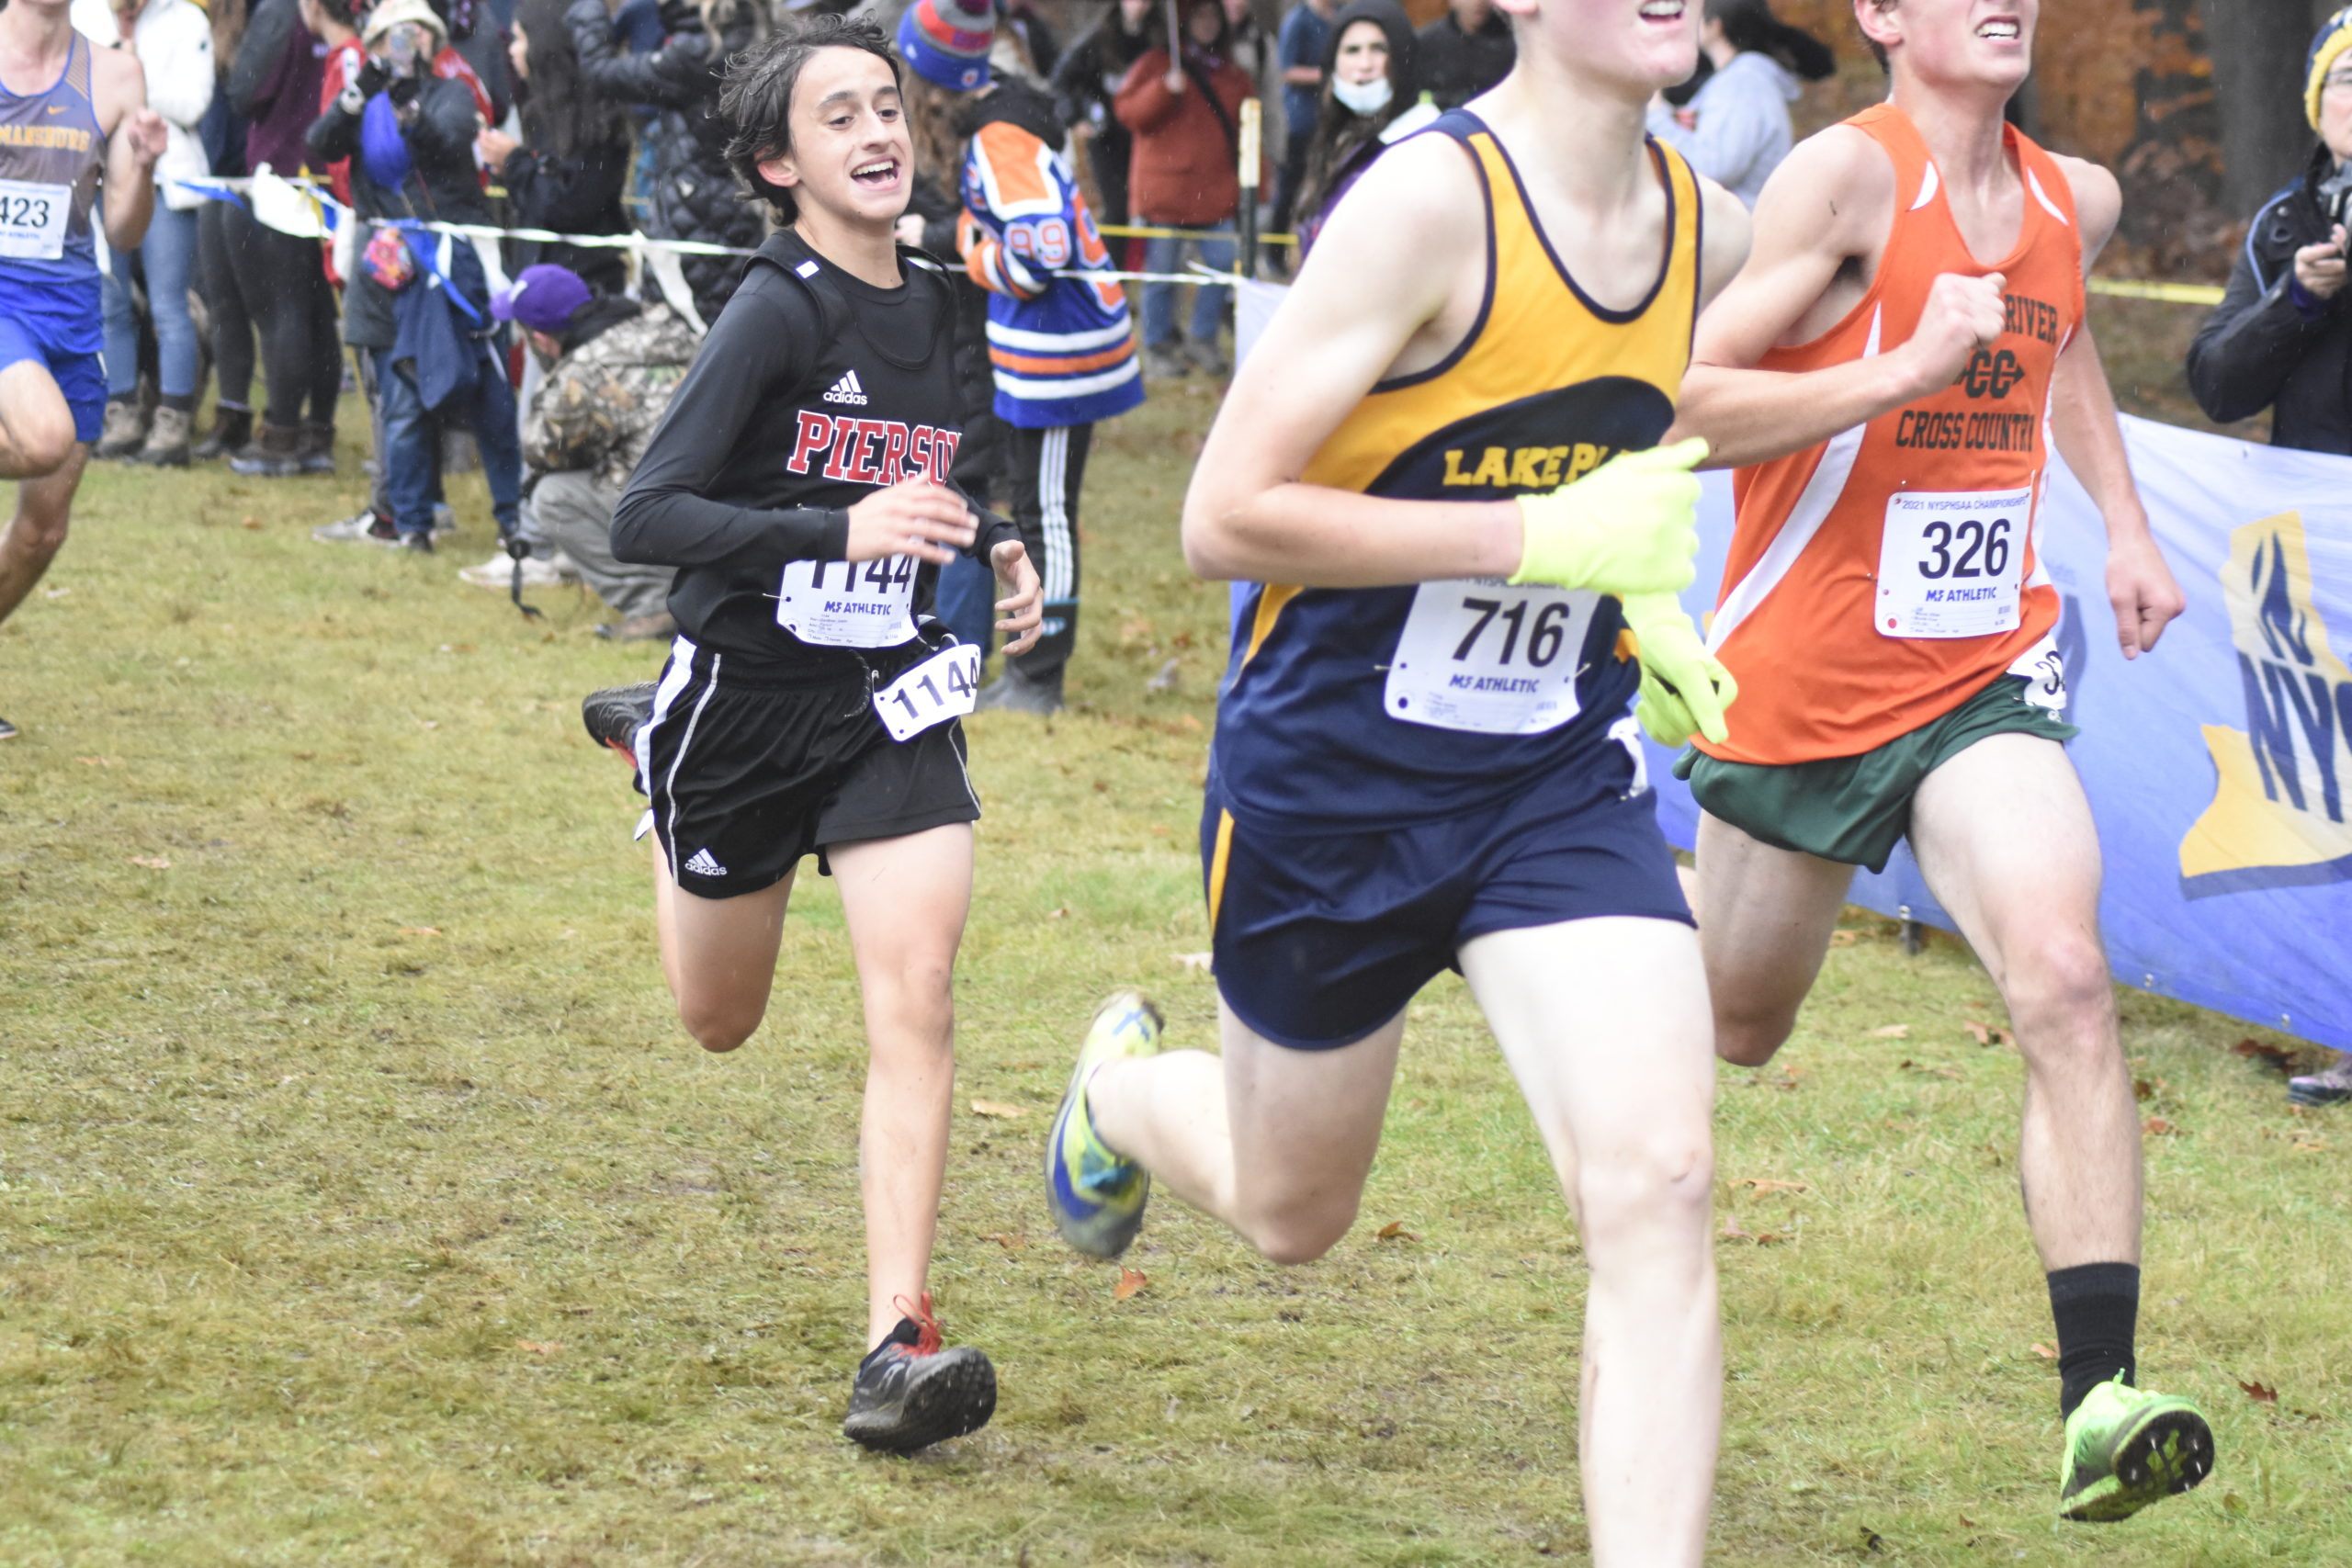 Justin Gardiner was an All-County runner for Pierson.